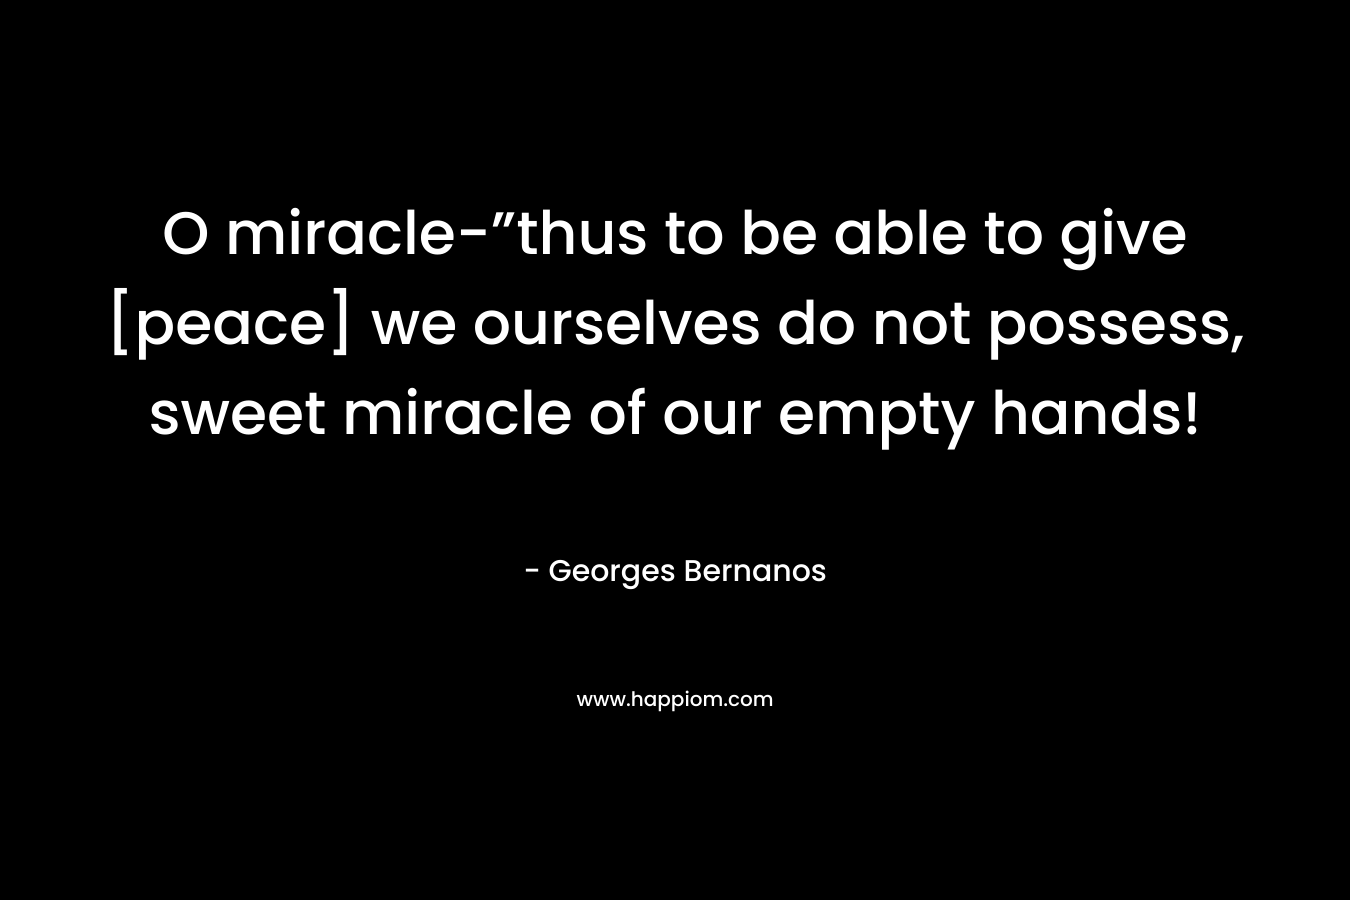 O miracle-”thus to be able to give [peace] we ourselves do not possess, sweet miracle of our empty hands!